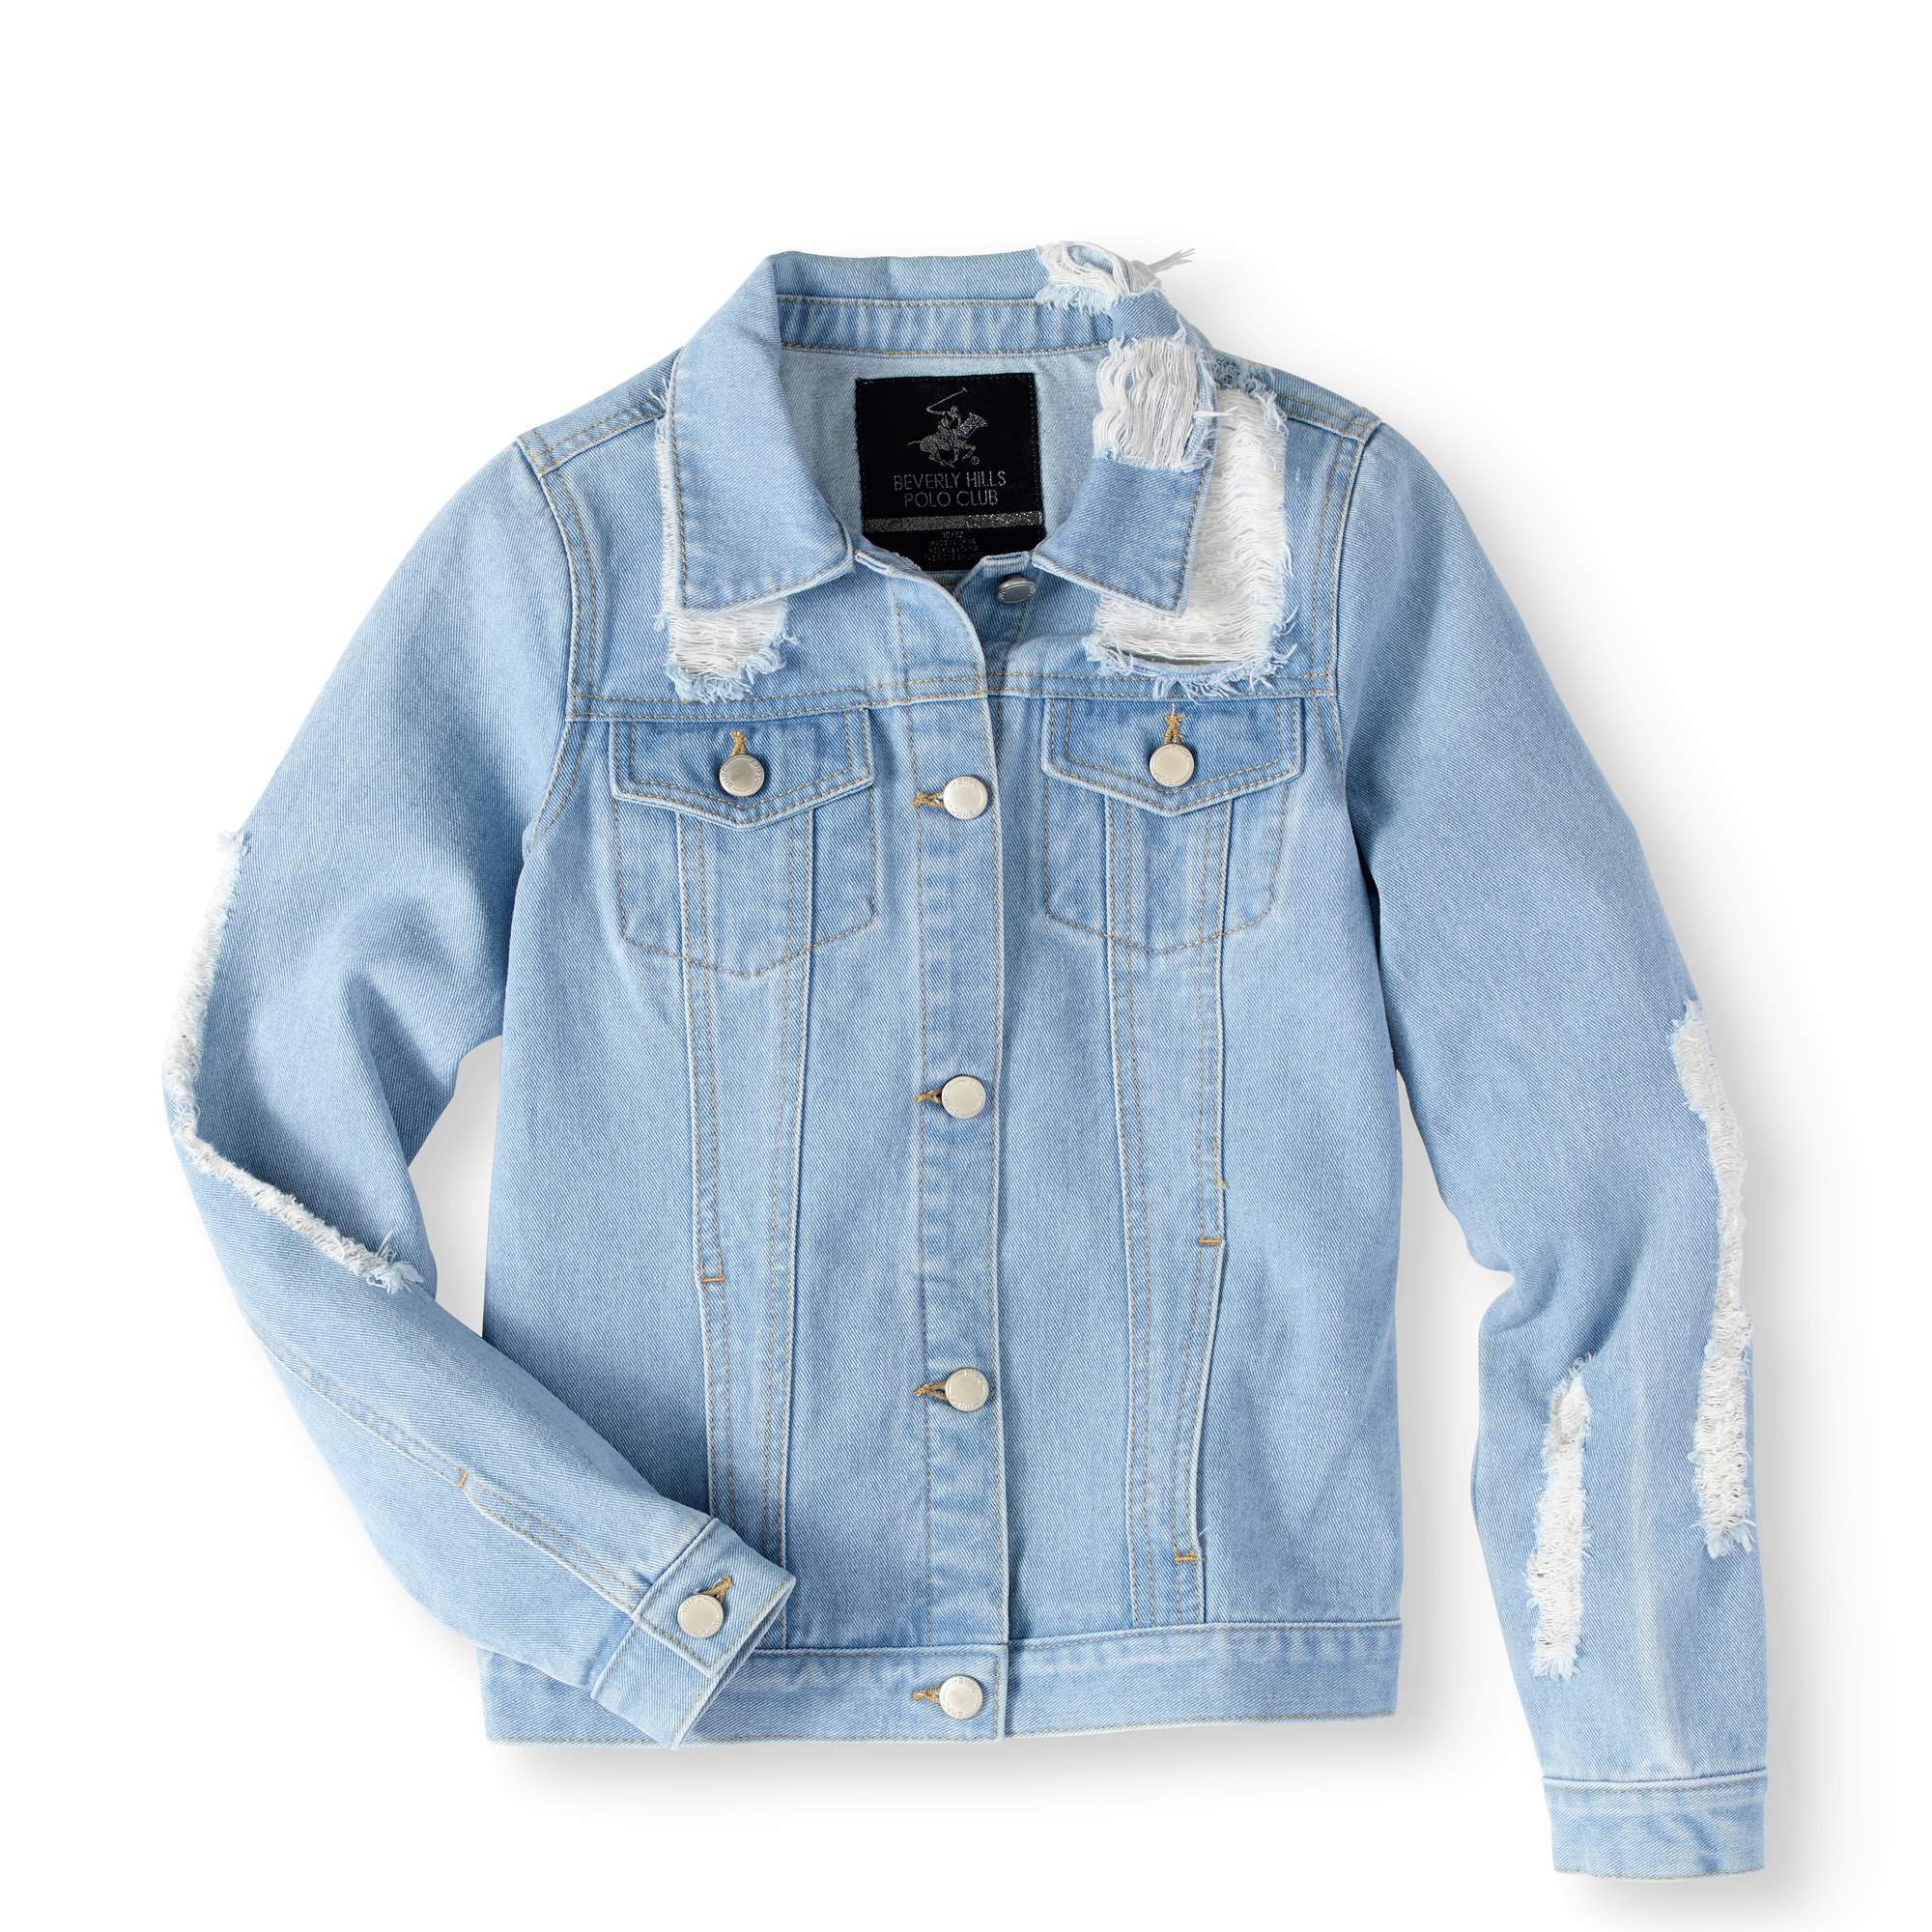 Beverly Hills Polo Club Girls 7-16 Distressed Denim Jean Jacket - image 1 of 2